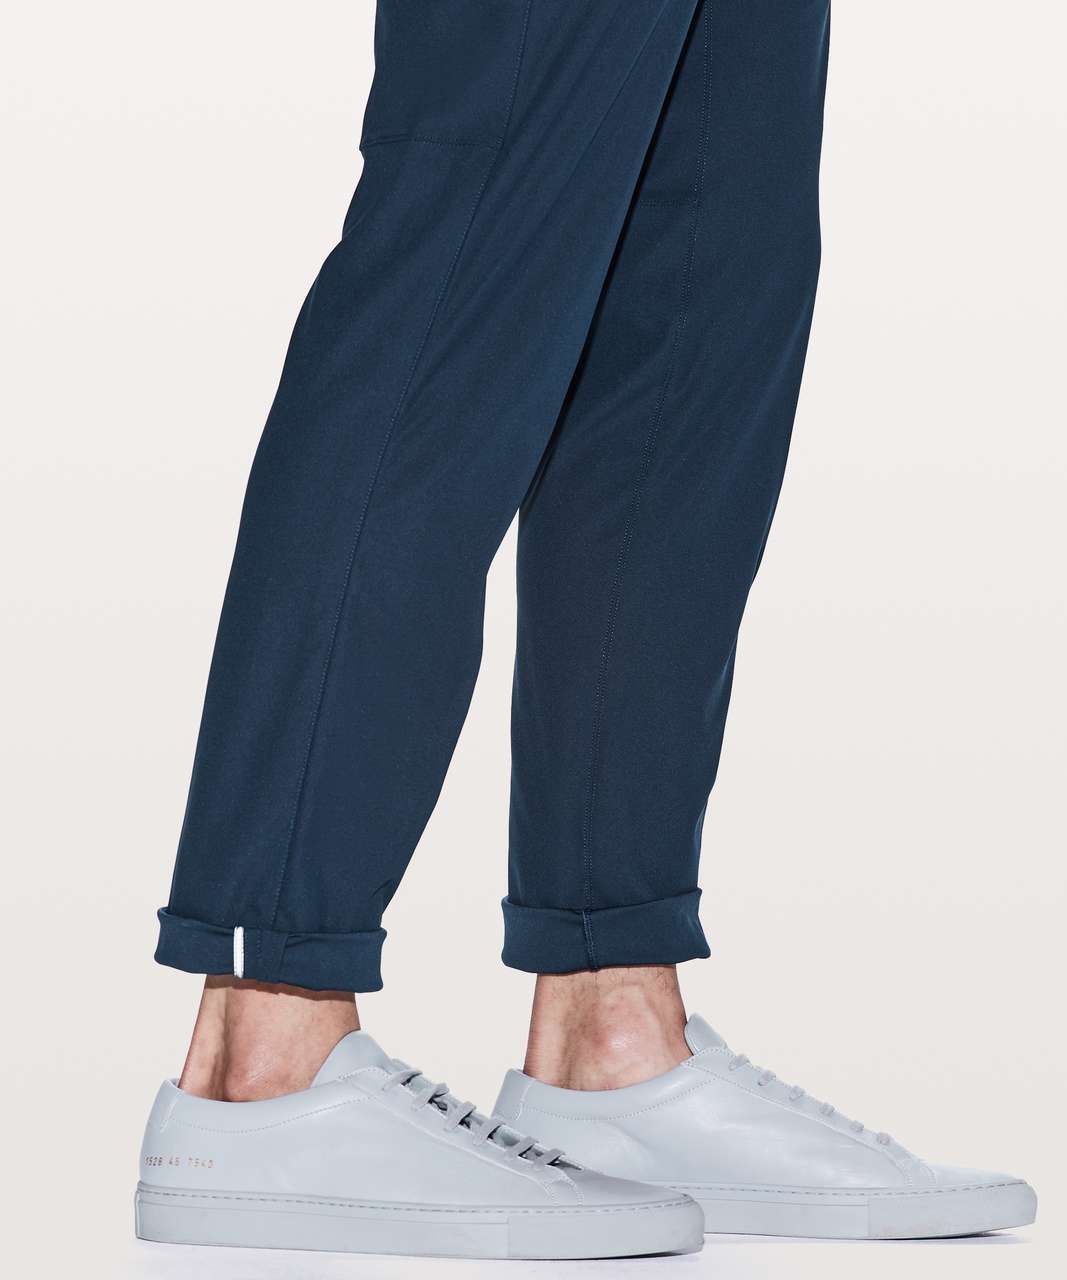 Lululemon Commission Pant Relaxed *34" - True Navy